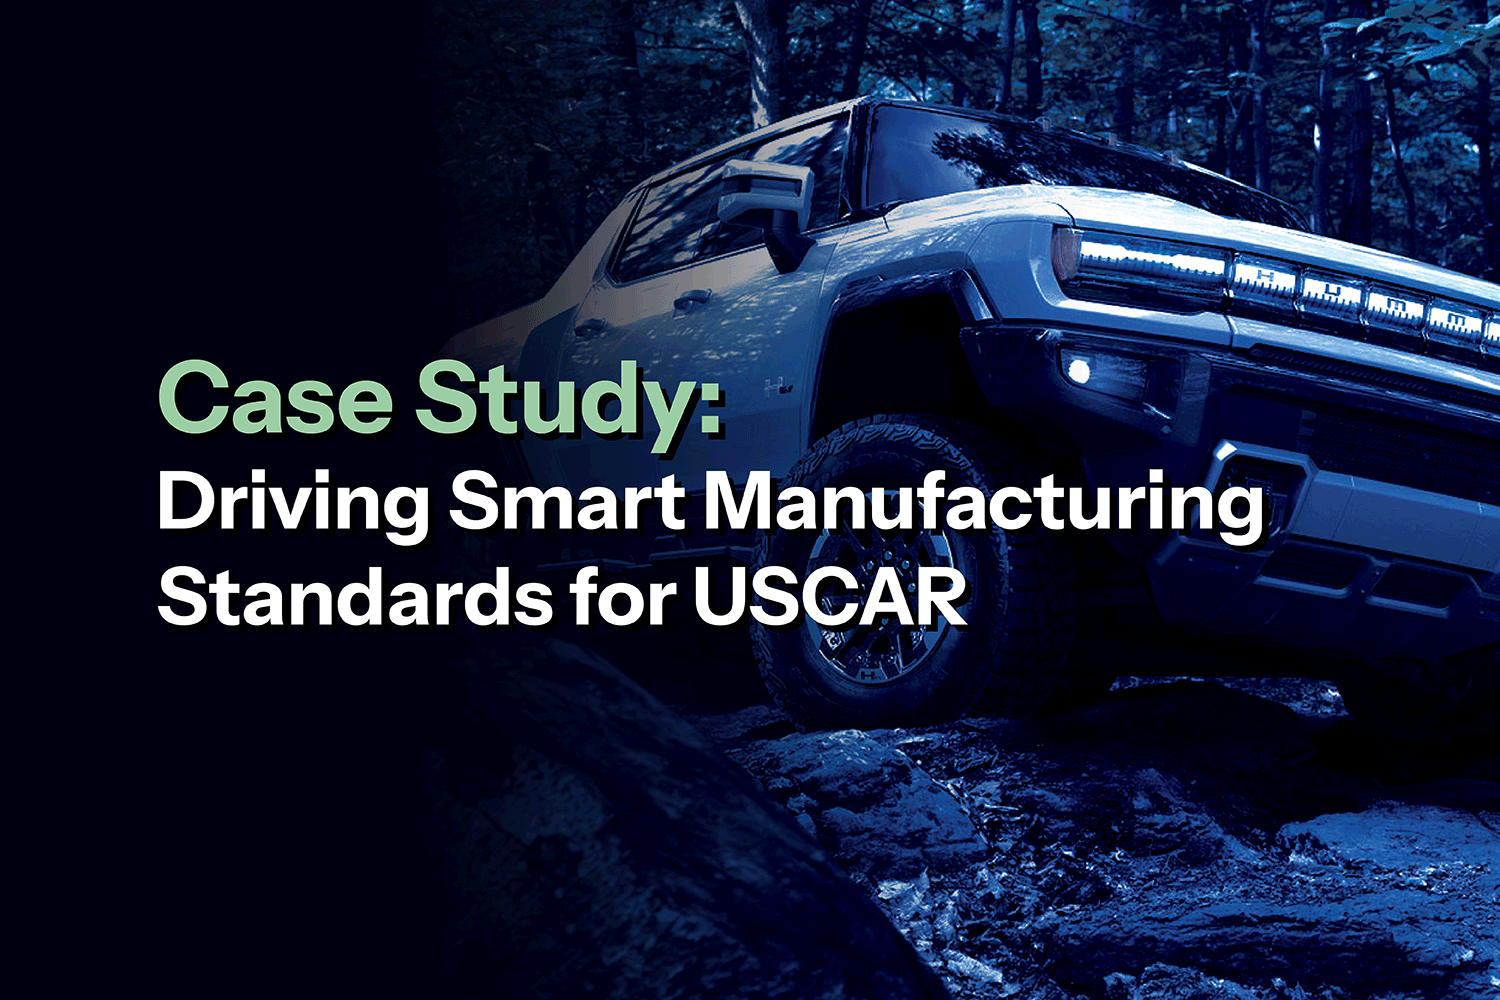 LSS-Knowledge-Center-Case-Study-Driving Smart Manufacturing(...)-Card-Images-01